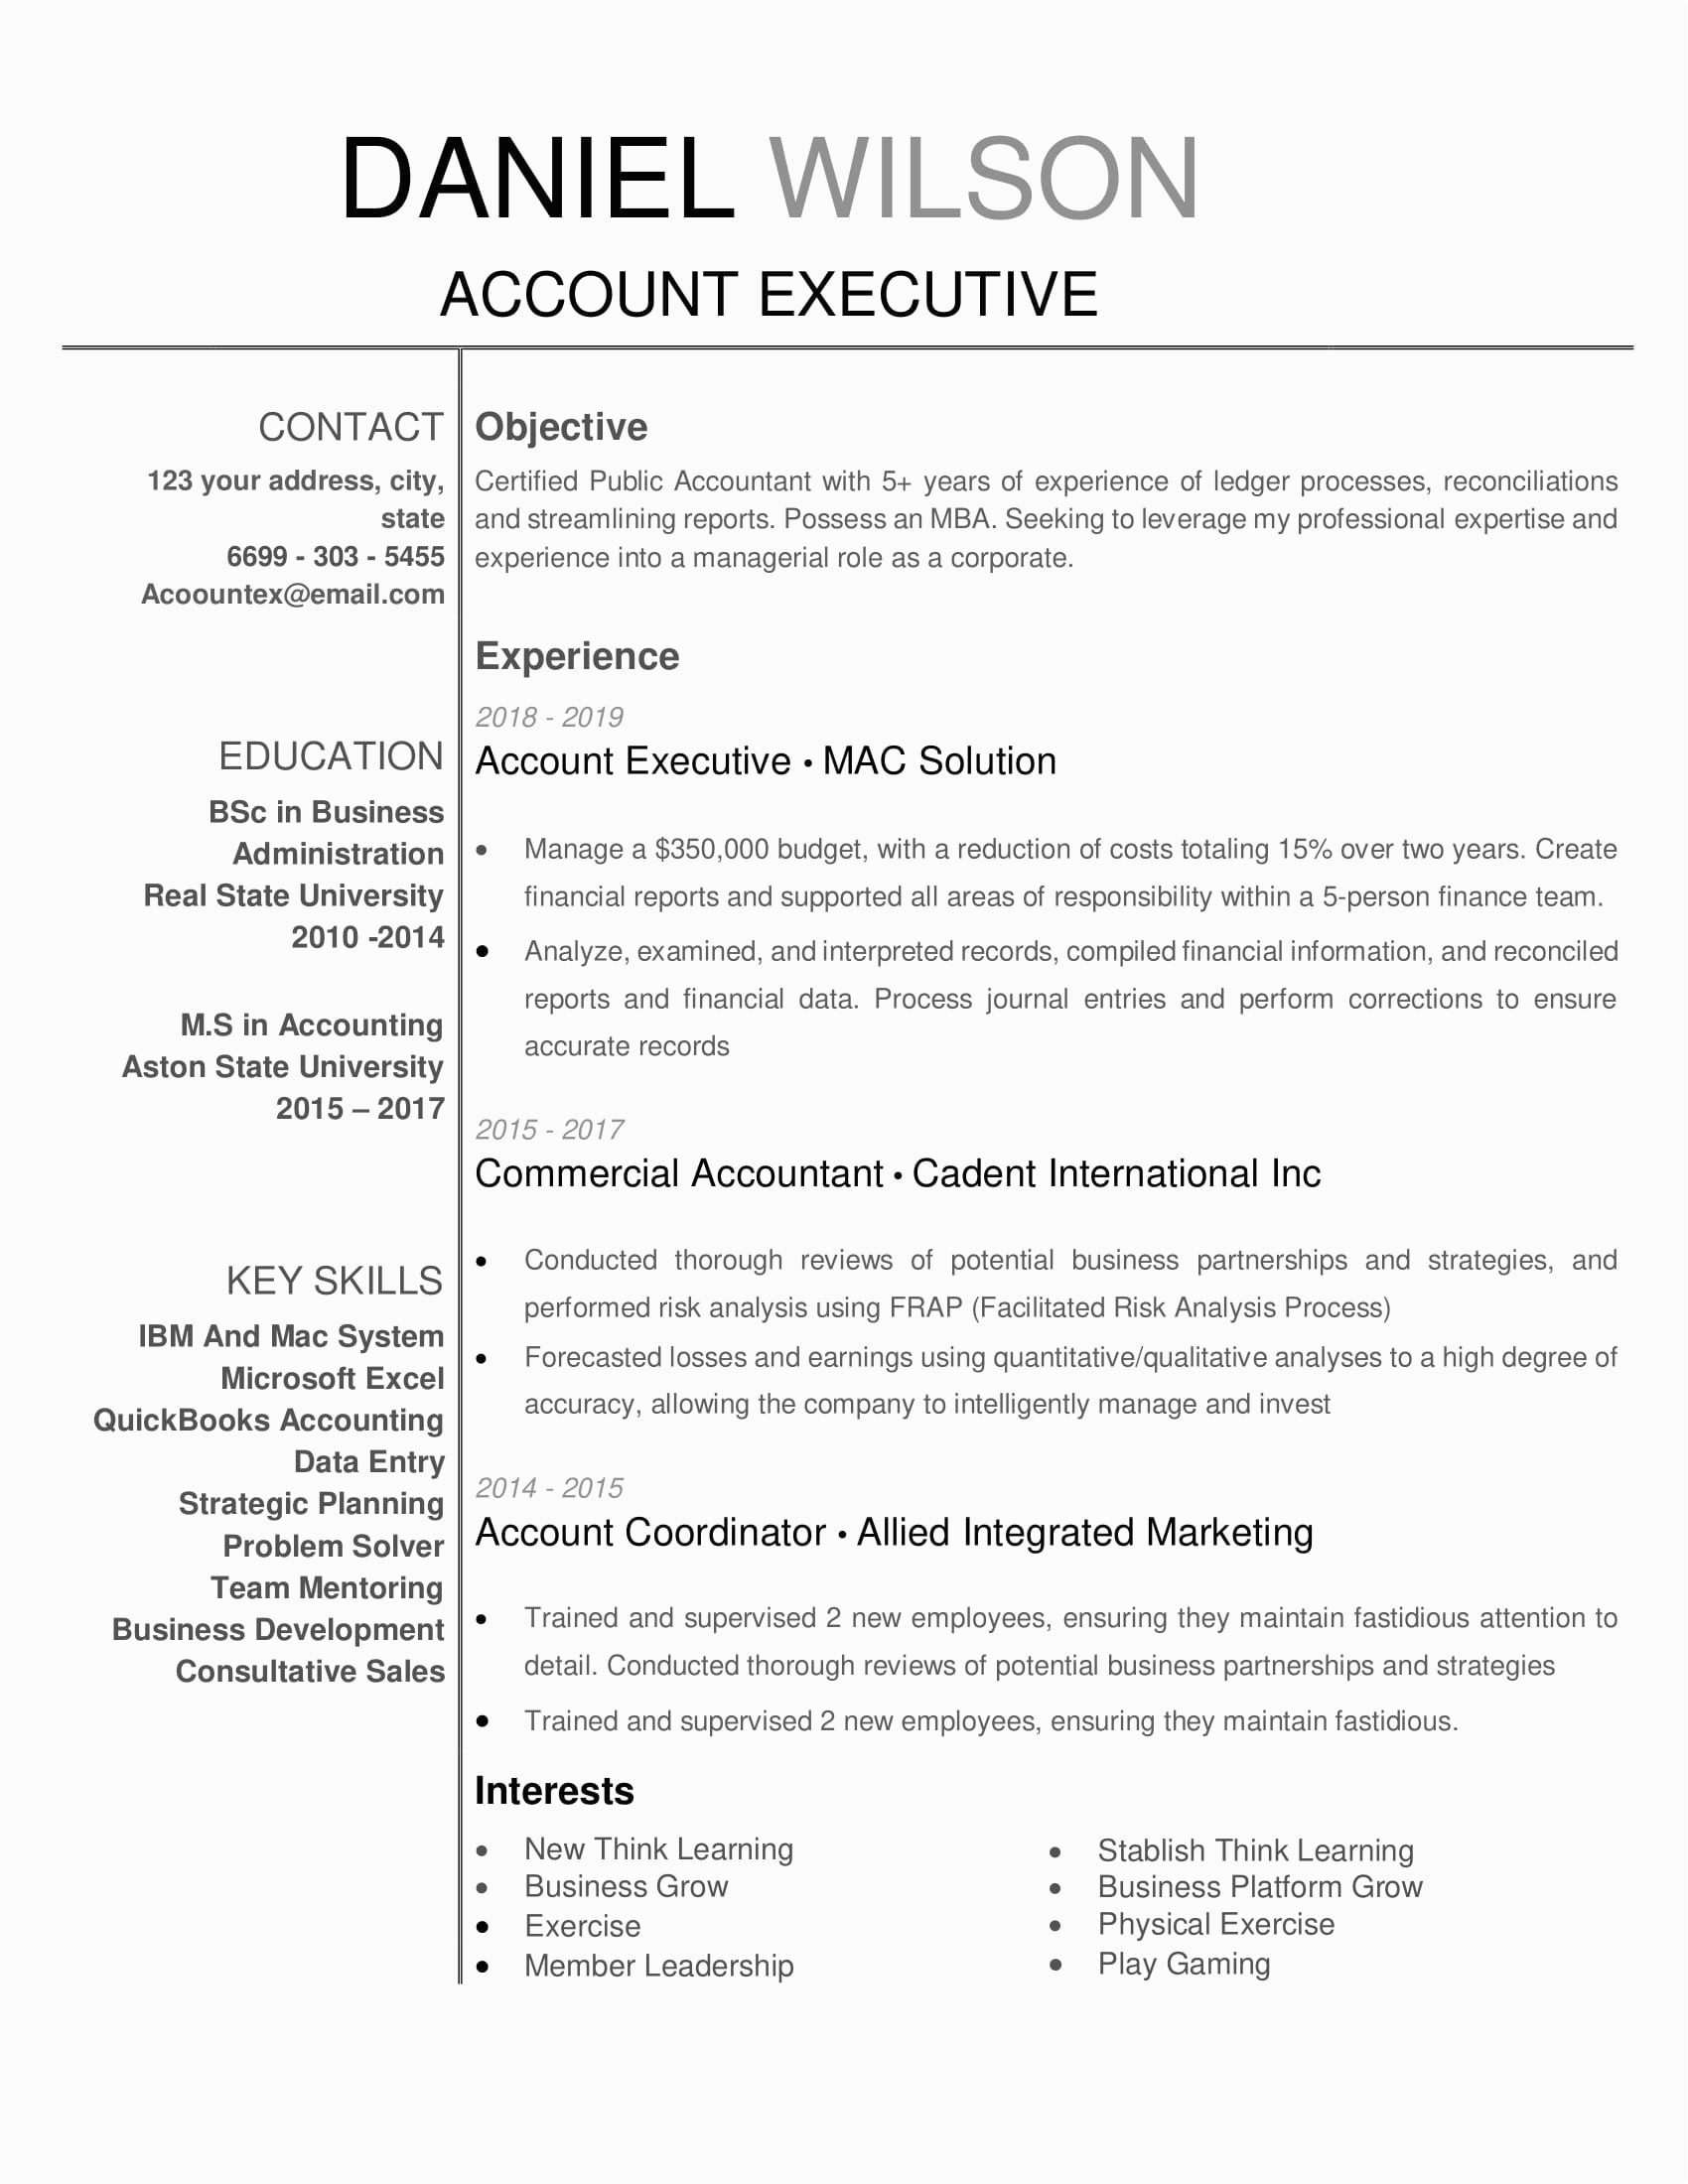 Ceo for Salon Equipment and Supplies Sample Resume Idaa Resume Template 0009 White 1 Page Account Executive No Pic V1